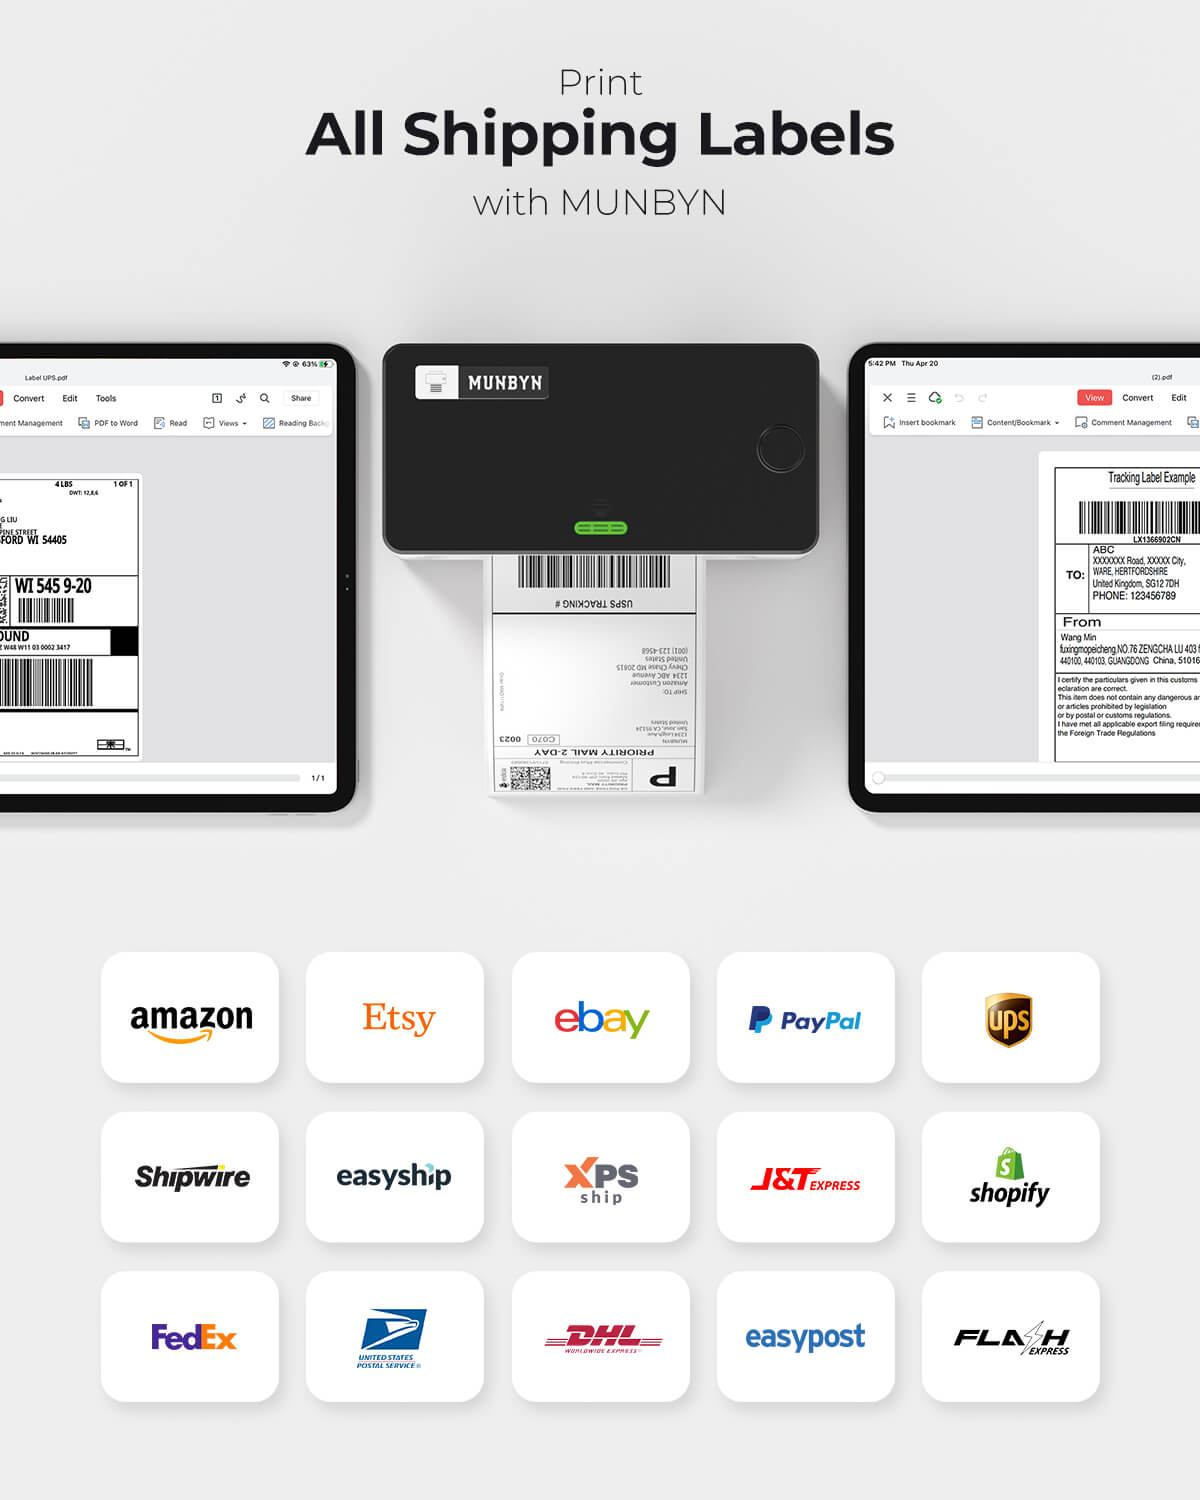 The MUNBYN 941AP AirPrint thermal printer is compatible with most shipping and shopping platforms.